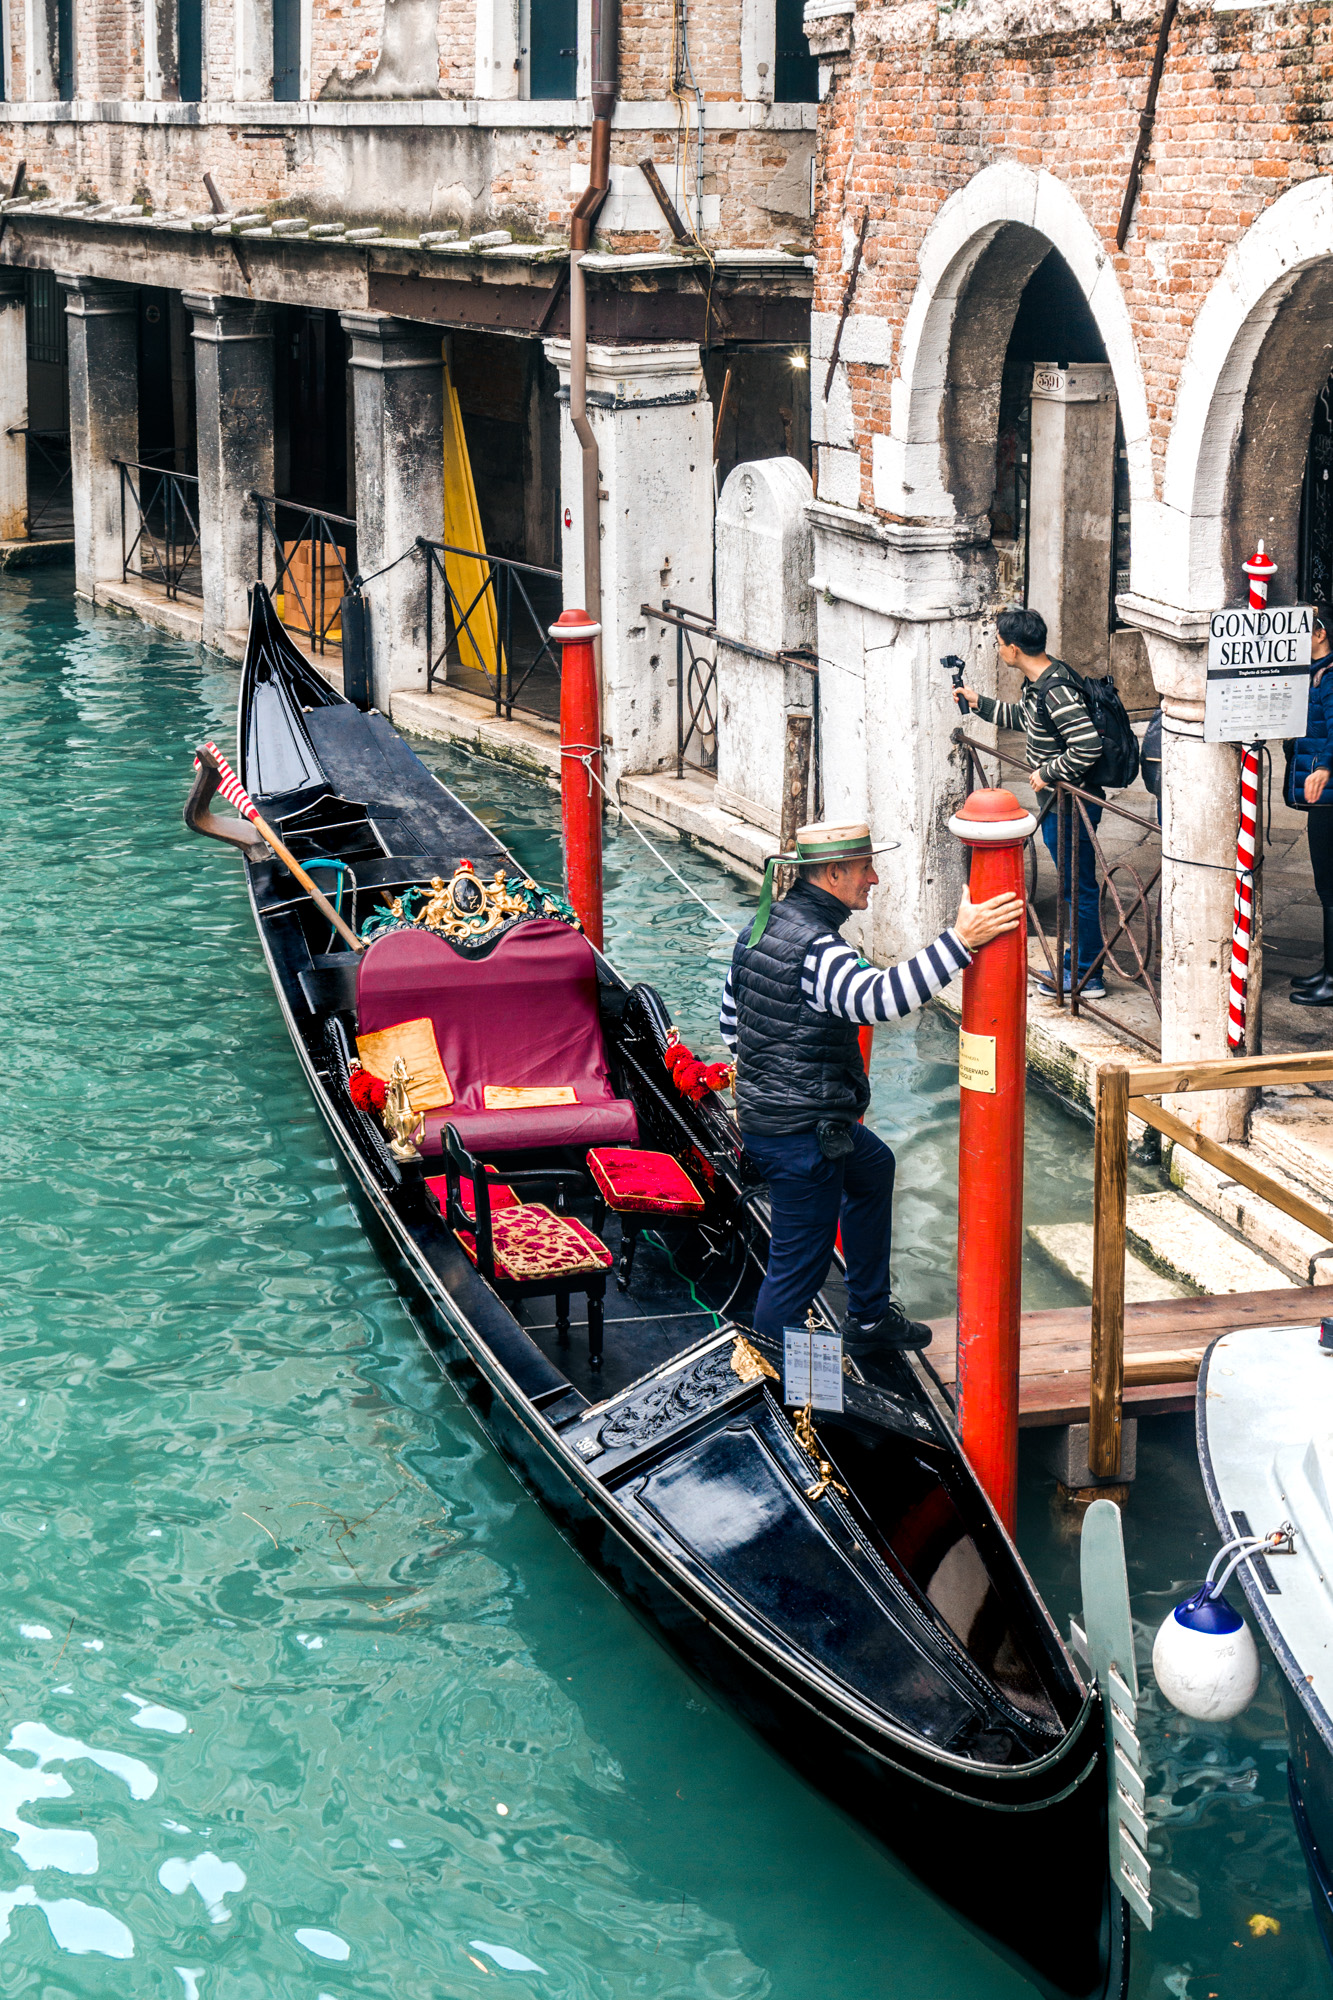 Venice – day 2, part 2